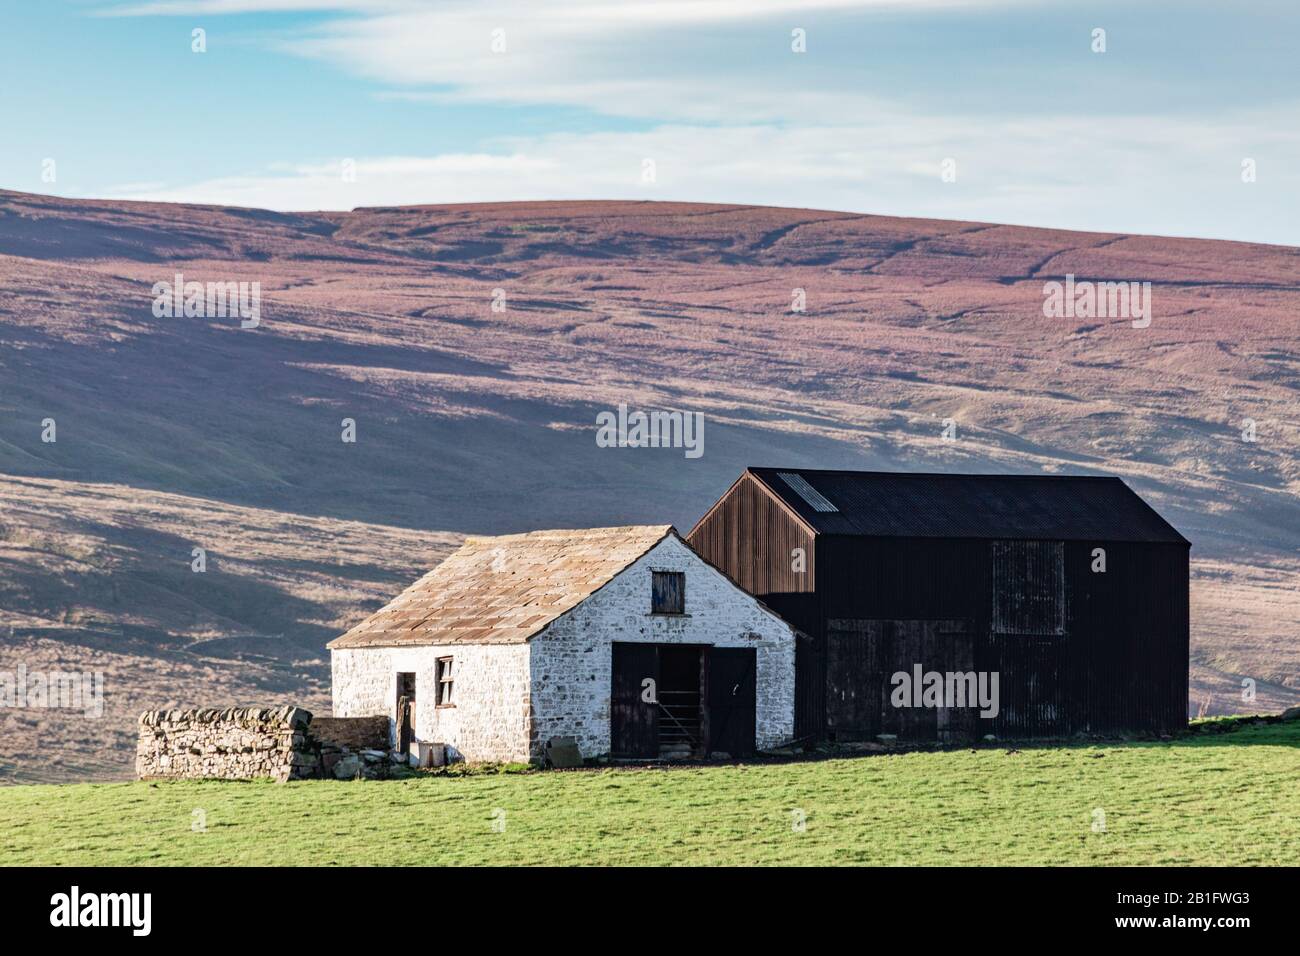 Edifici agricoli a Teesdale, North Pennines, Inghilterra Foto Stock